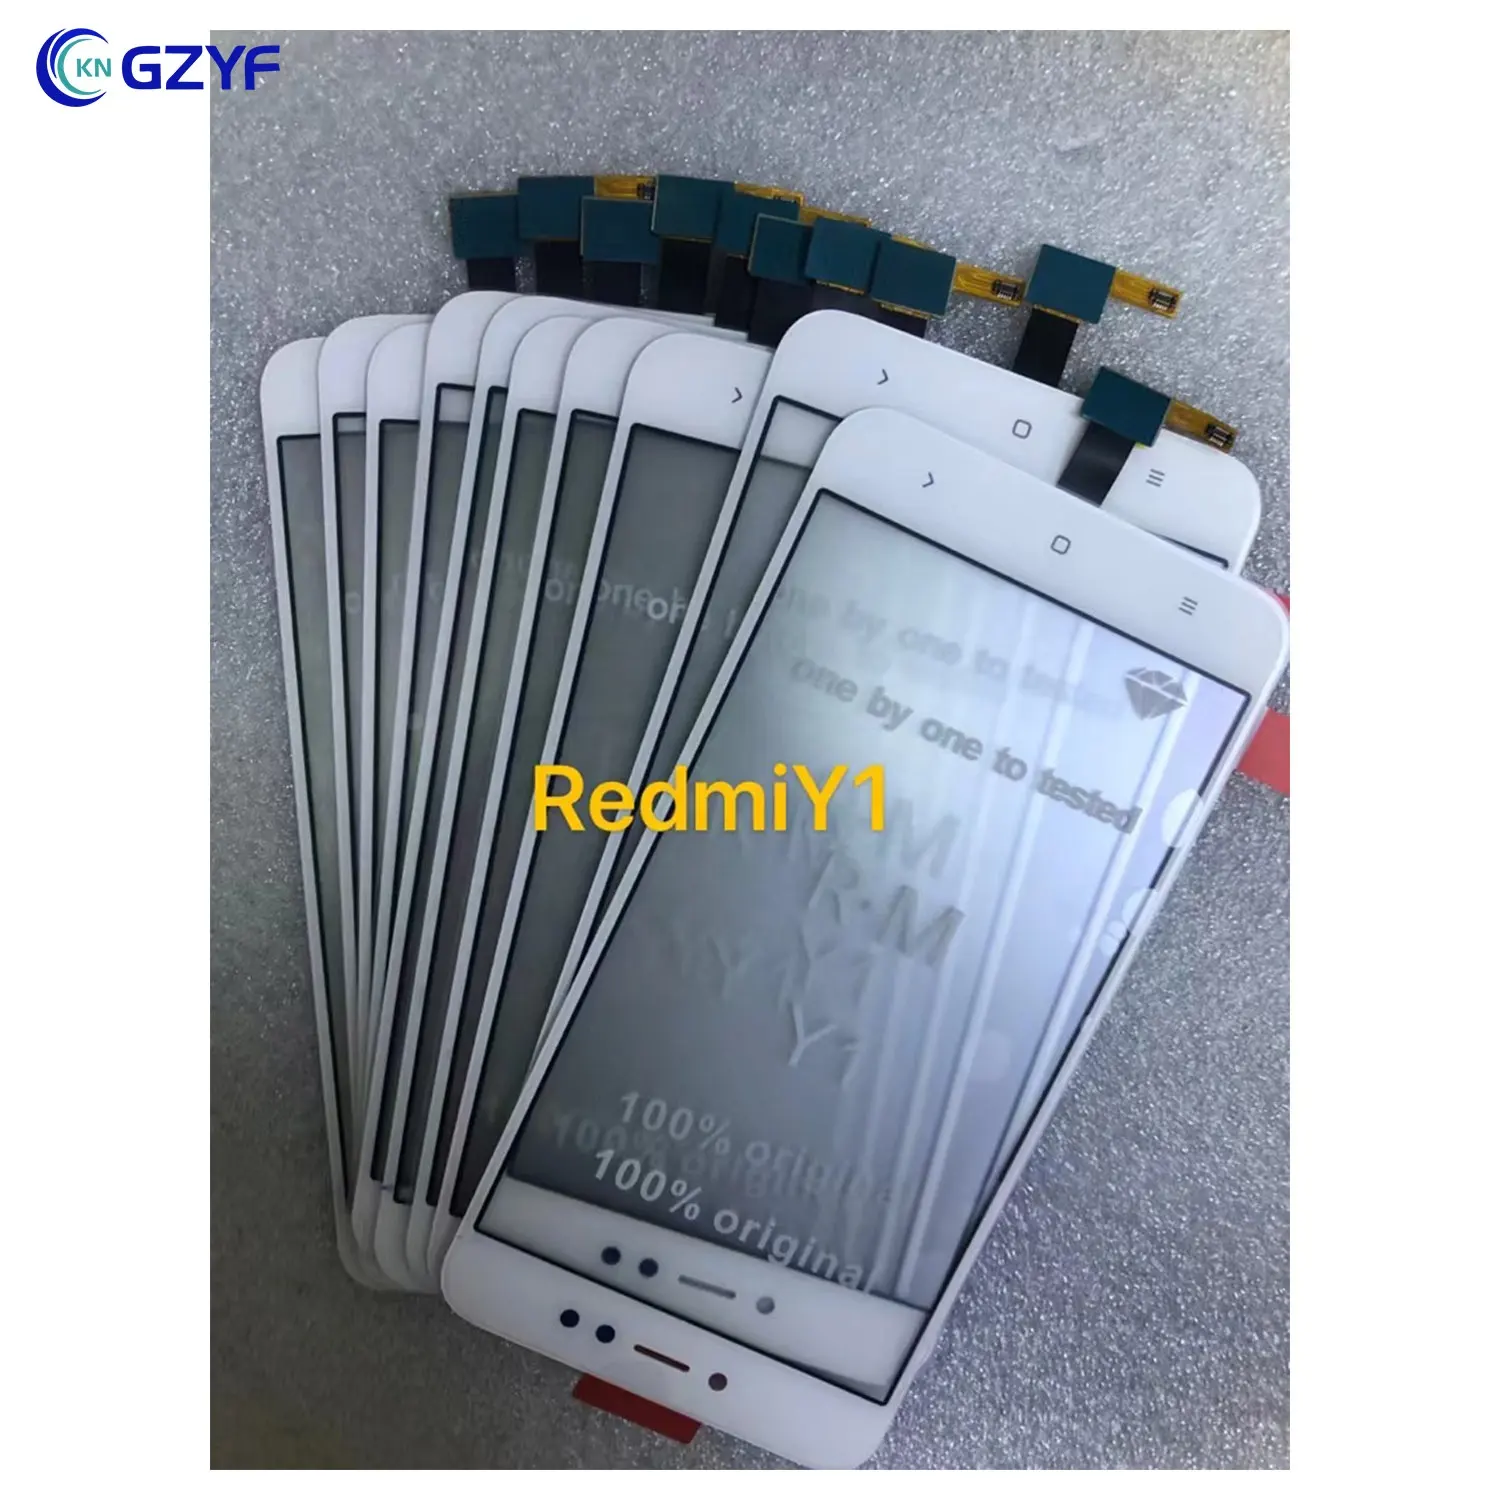 TouchPad Digital Assembly Display Screen Glass With OCA for Redmi Note 5A Y1 Lite 4A Y3 2S S2 wholesale mobile phone accessories